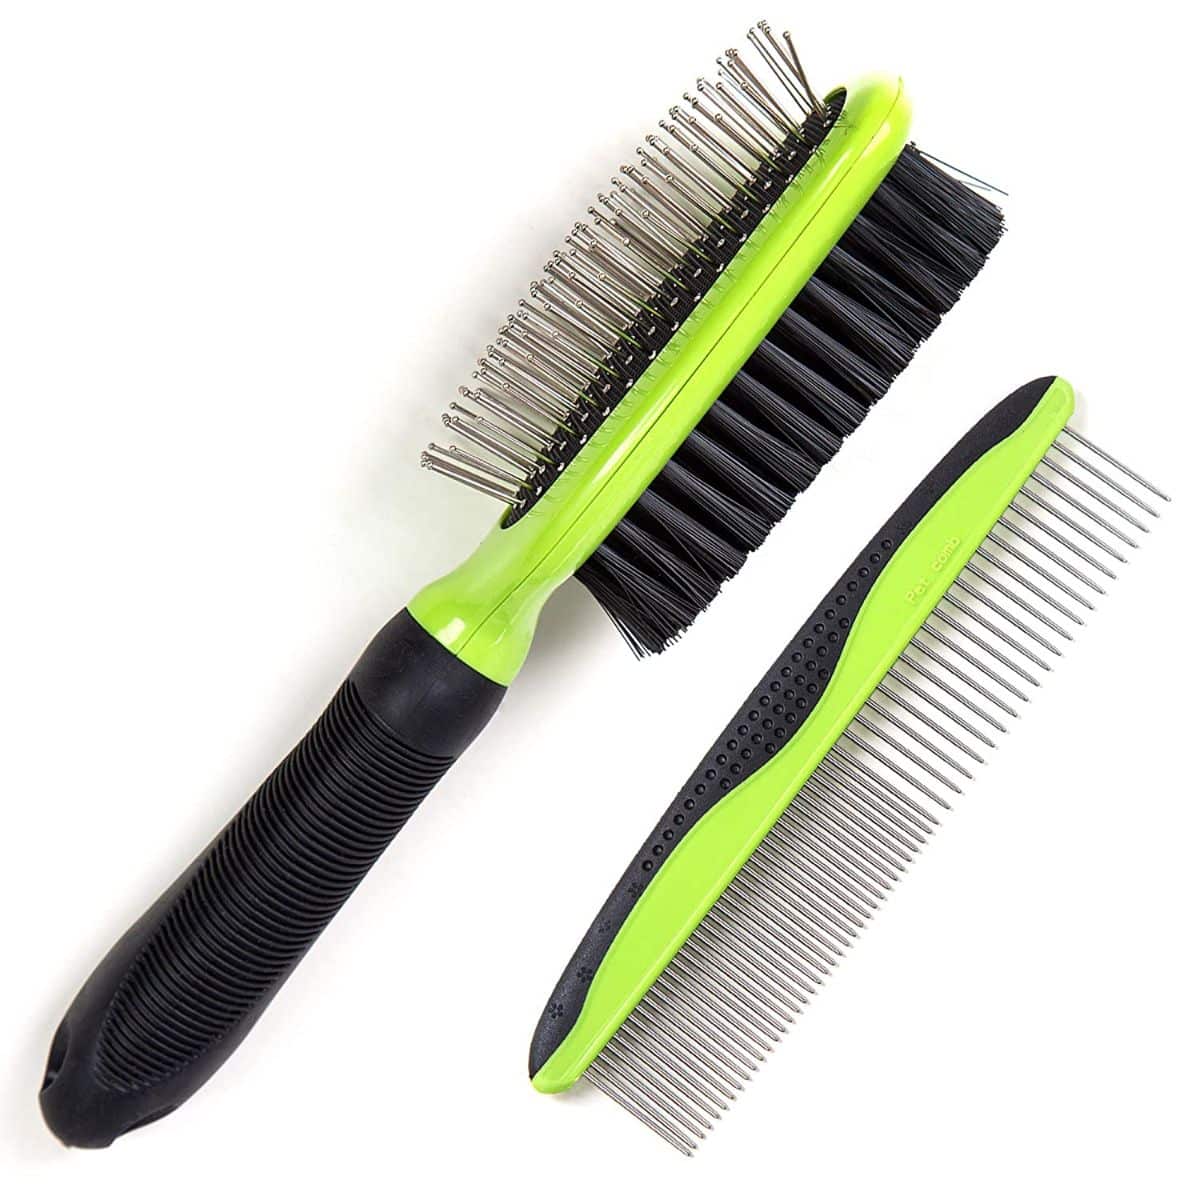 Rexipets Brush & Comb Pet Grooming Set